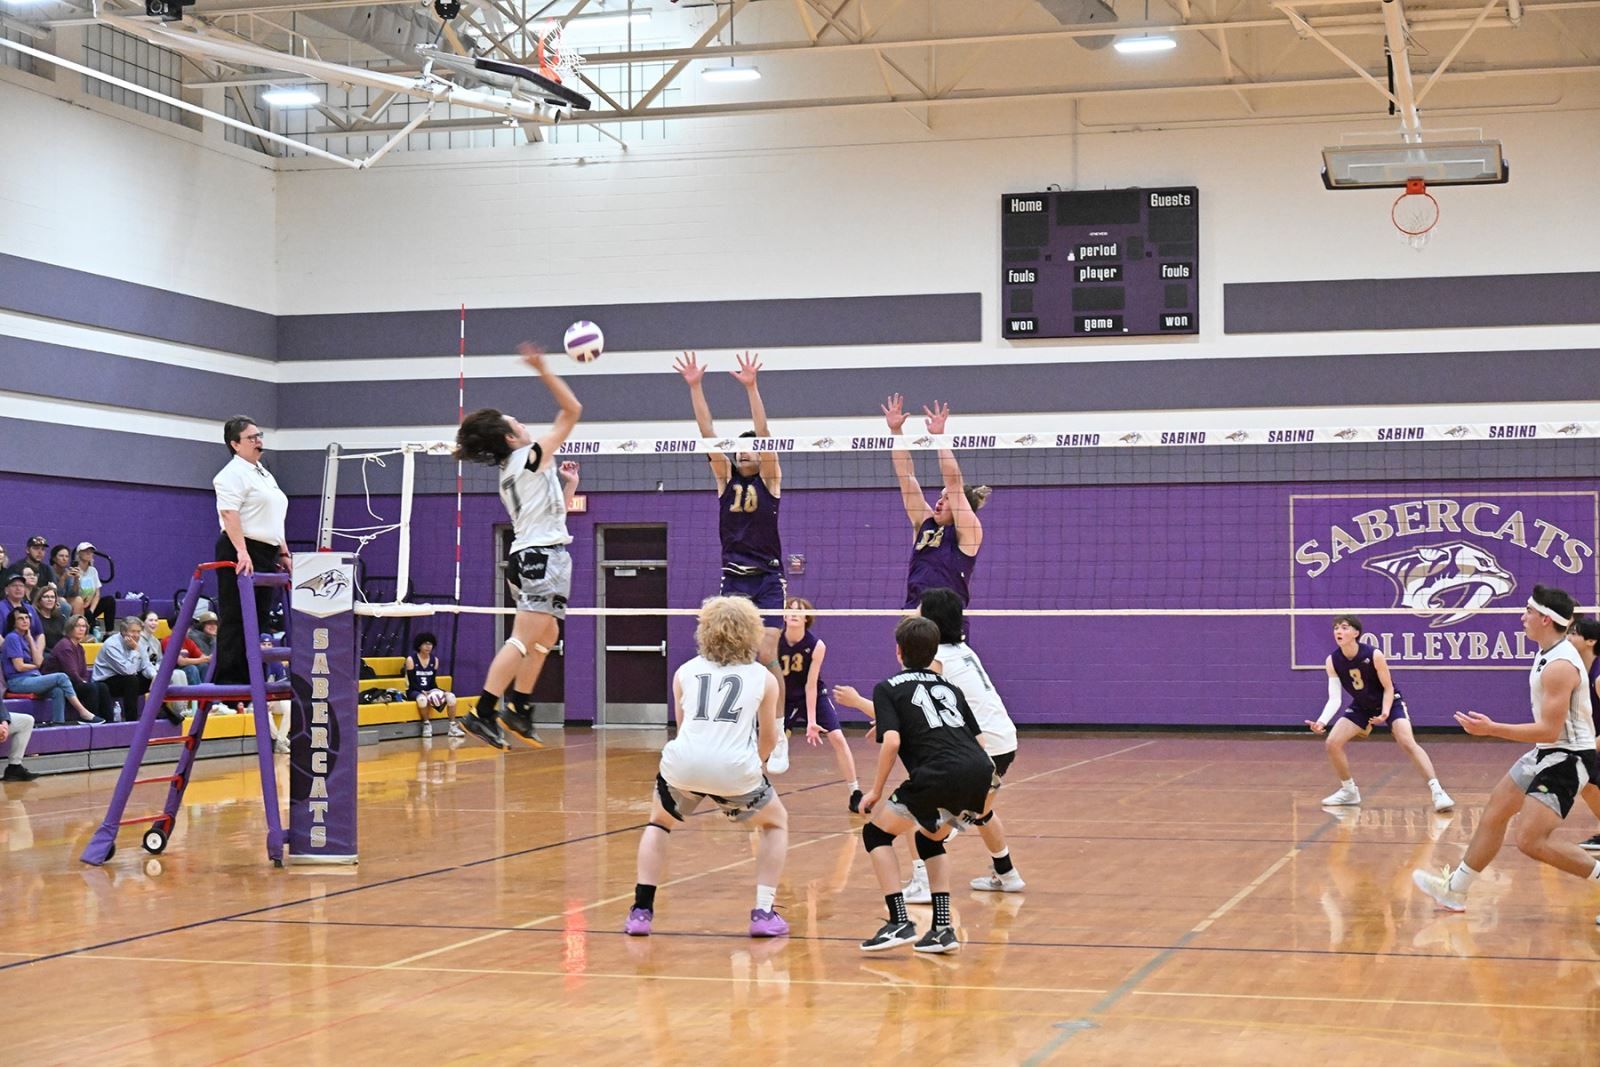 The opposing team spikes the ball over the net to Sabino